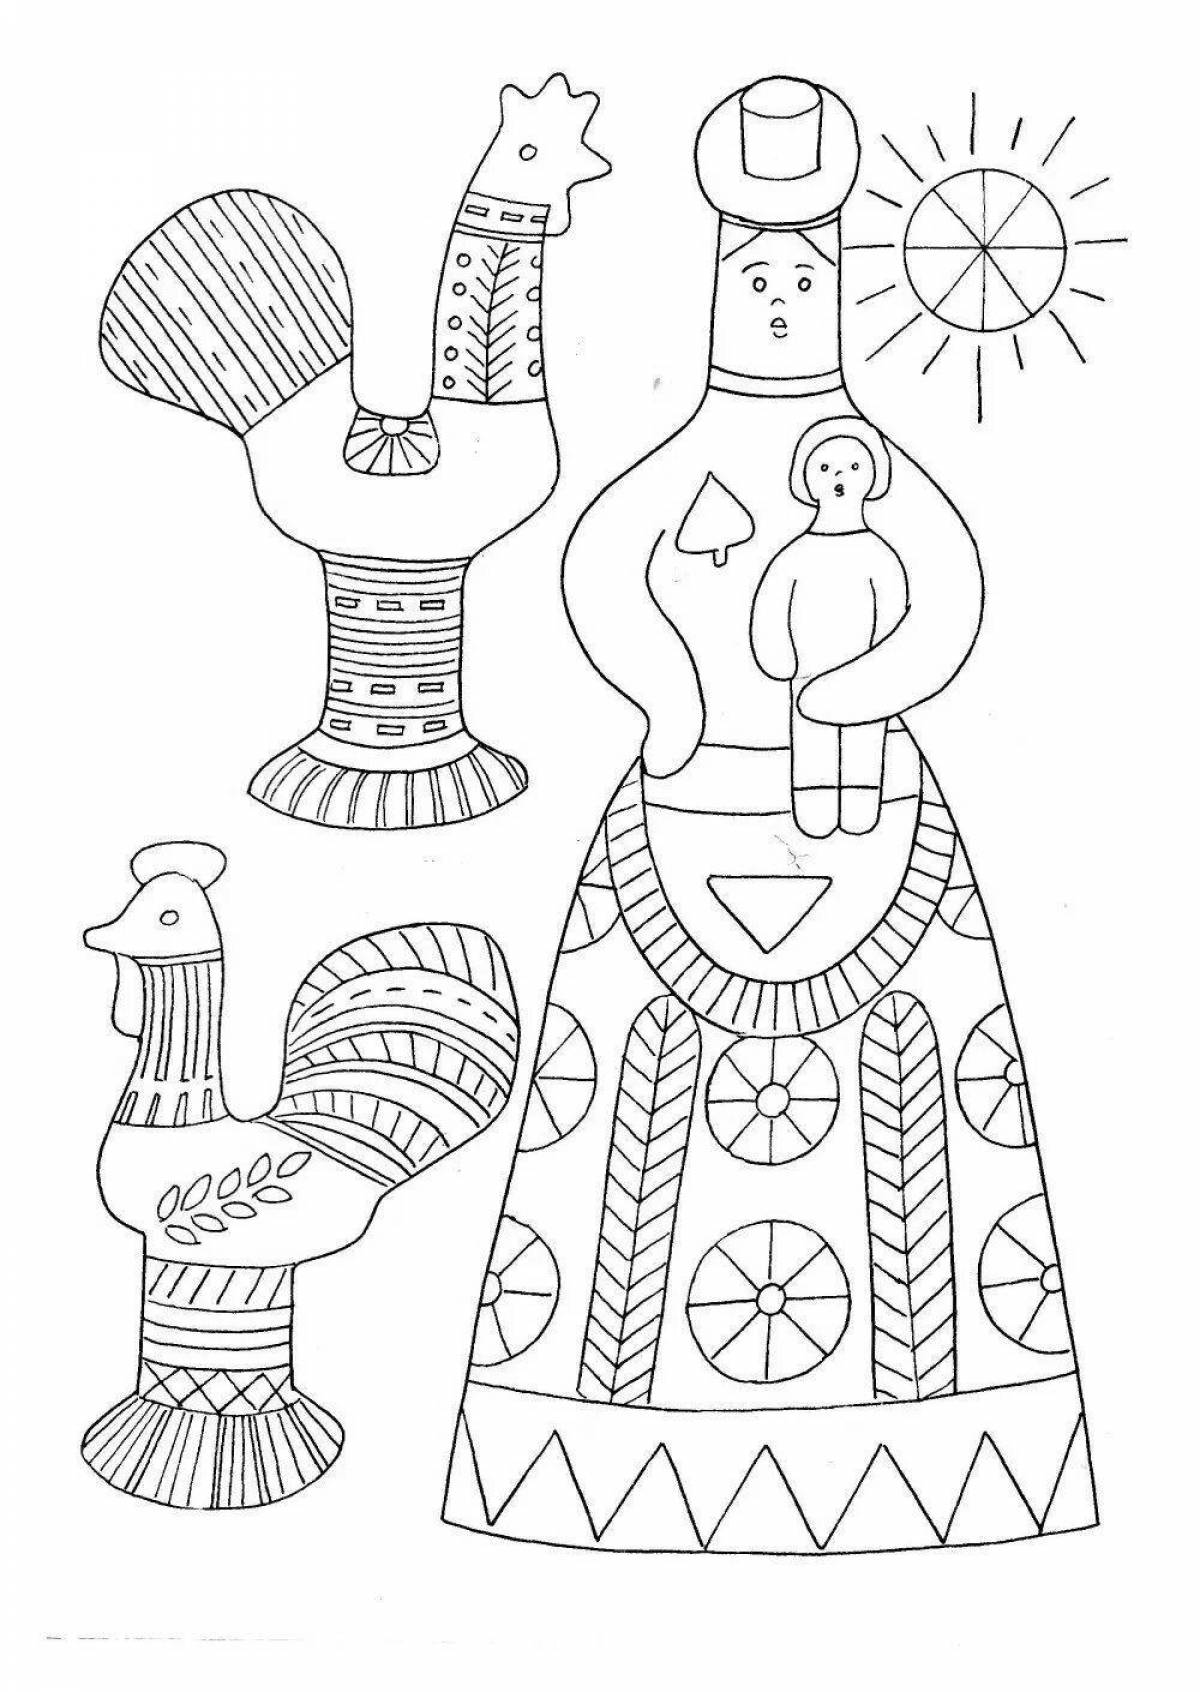 Coloring Russian folk crafts